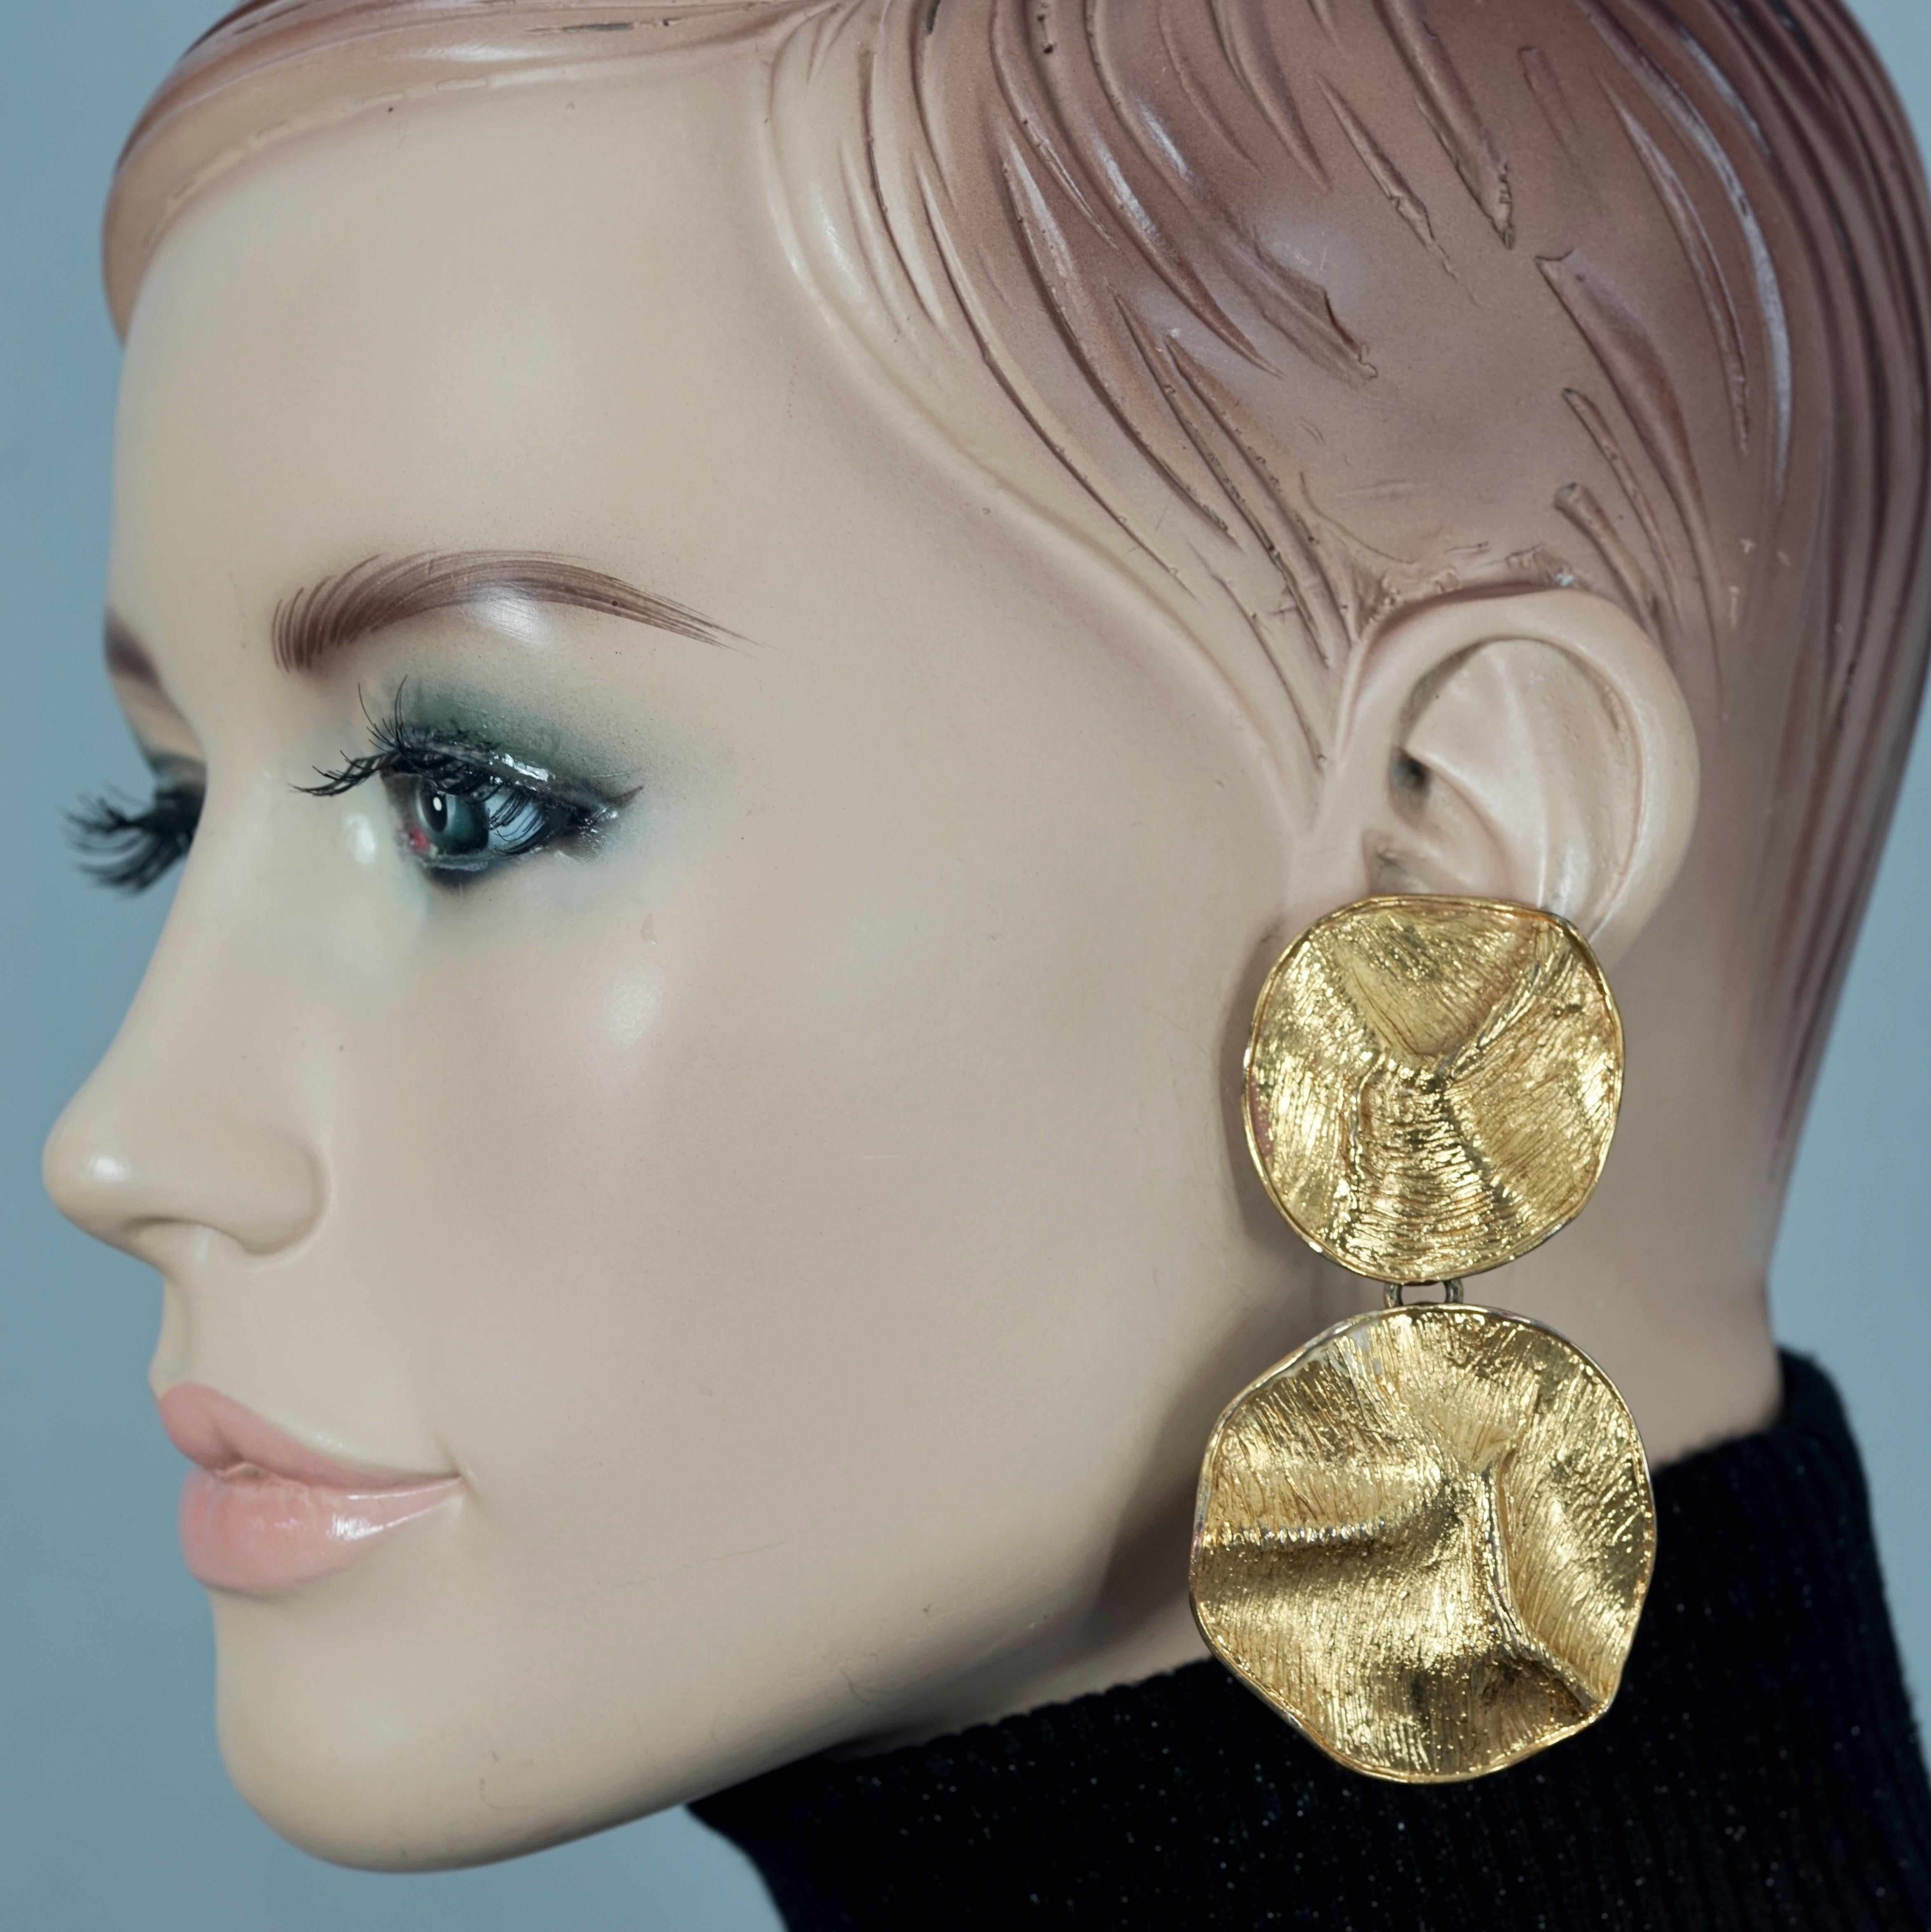 Vintage YVES SAINT LAURENT Ysl Wrinkled Textured Disc Dangling Earrings

Measurements:
Height: 3.15 inches  (8 cms)
Width: 1.69 inches (4.3 cms)
Weight per Earring: 30 grams

Features:
- 100% Authentic YVES SAINT LAURENT by Robert Goossens .
-